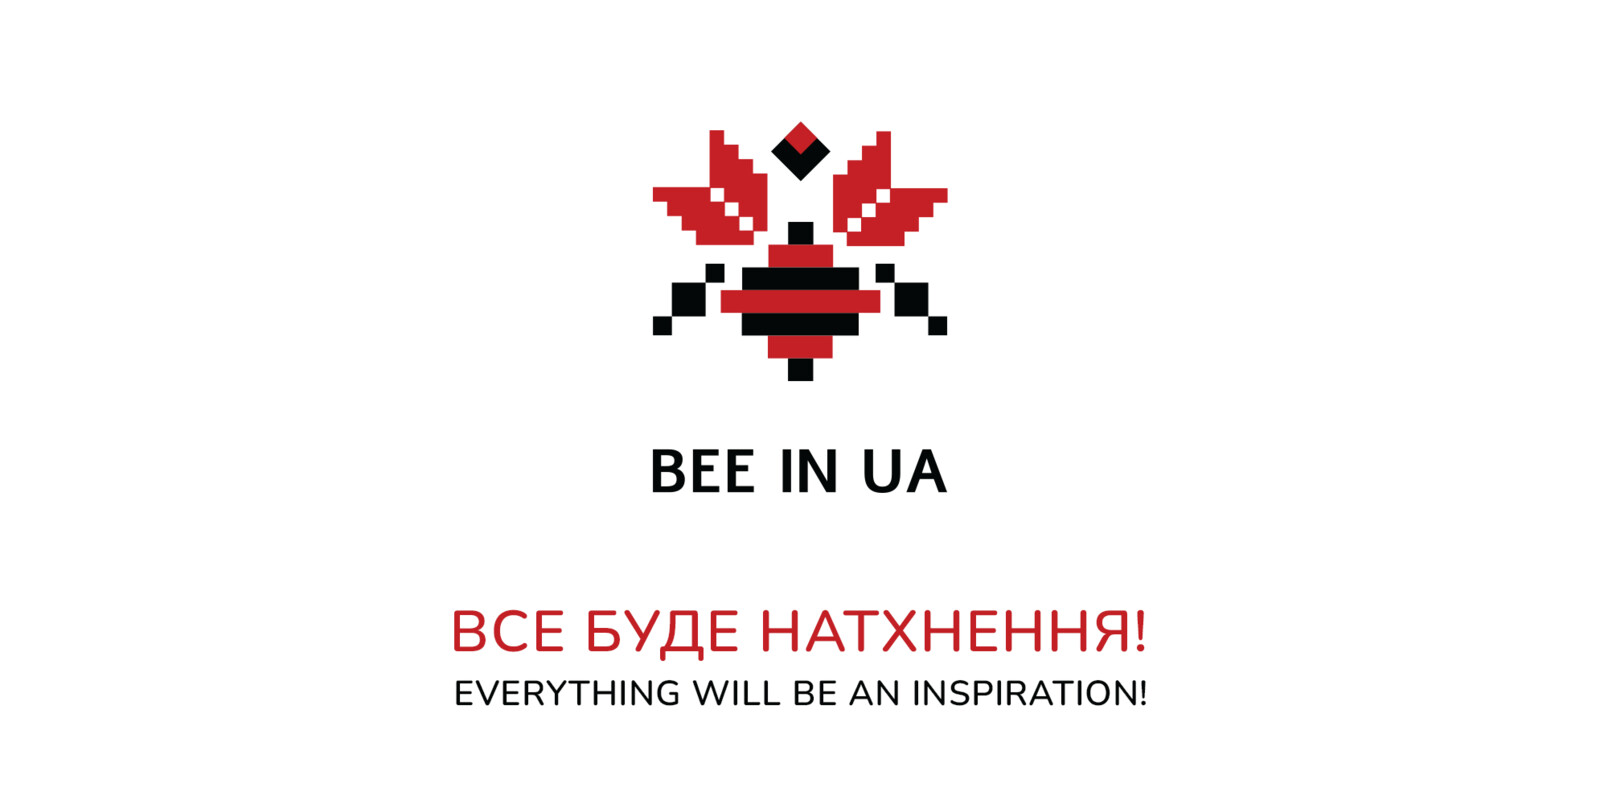 We'll survive and win. Bee IN UA